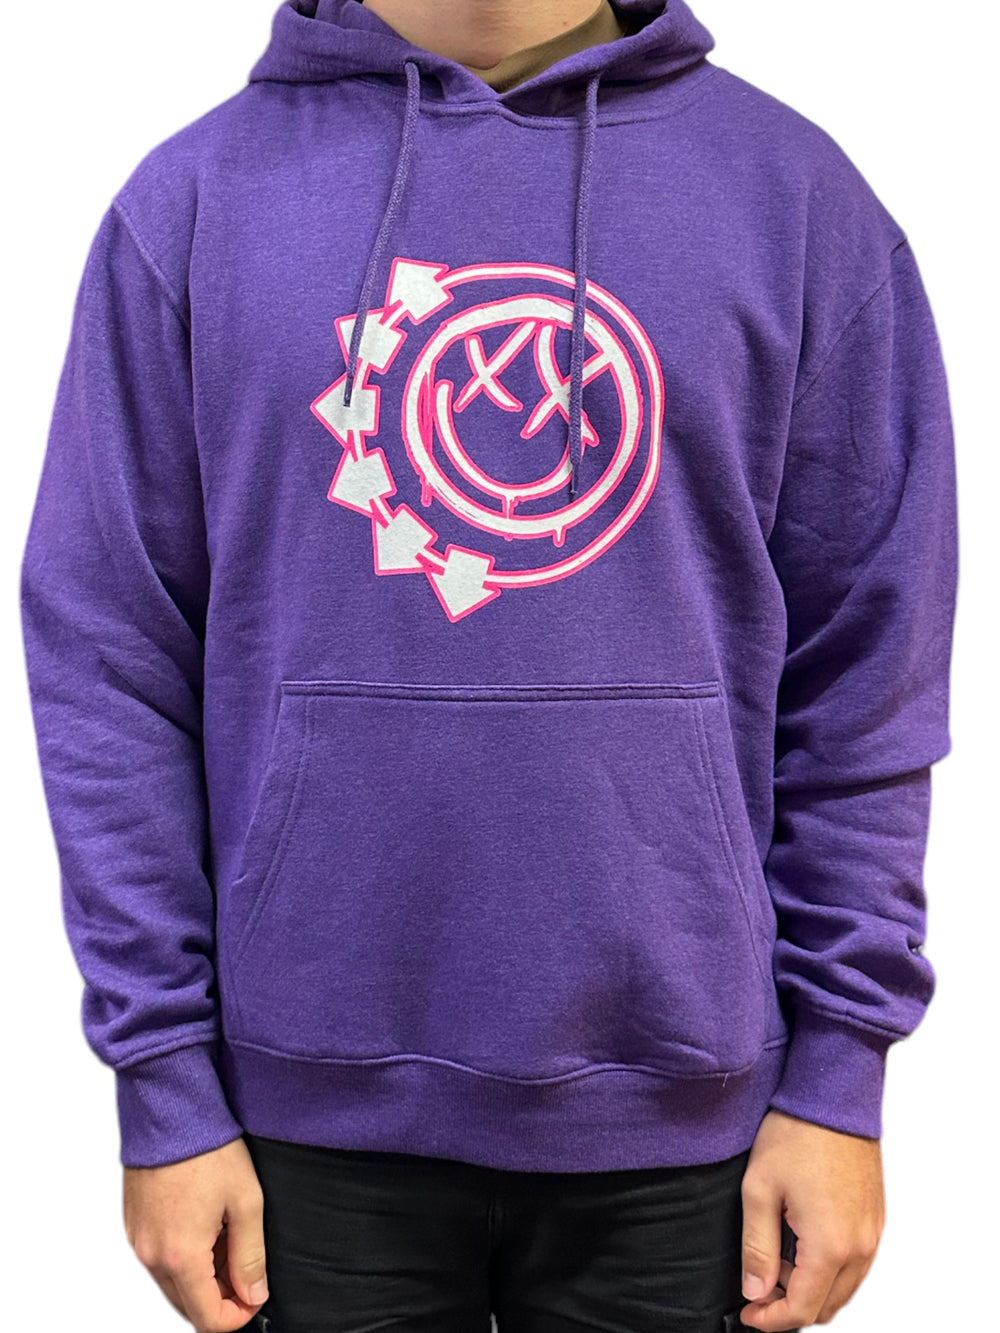 Blink-182 Six Arrow Smile Official Unisex Pullover Hoodie: NEW